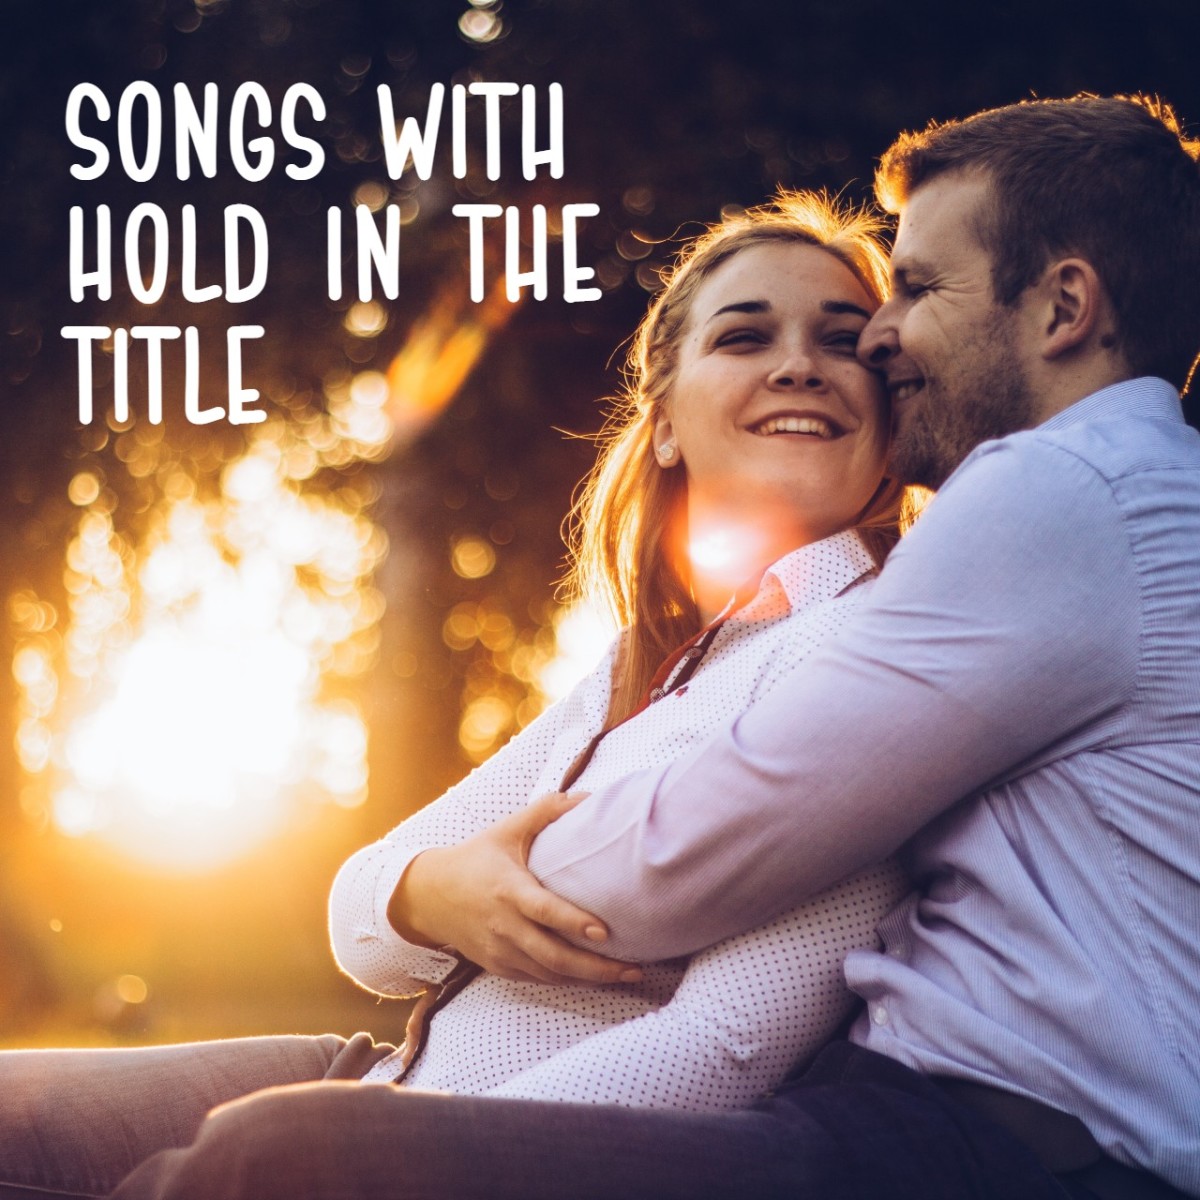 82 Songs With Hold in the Title